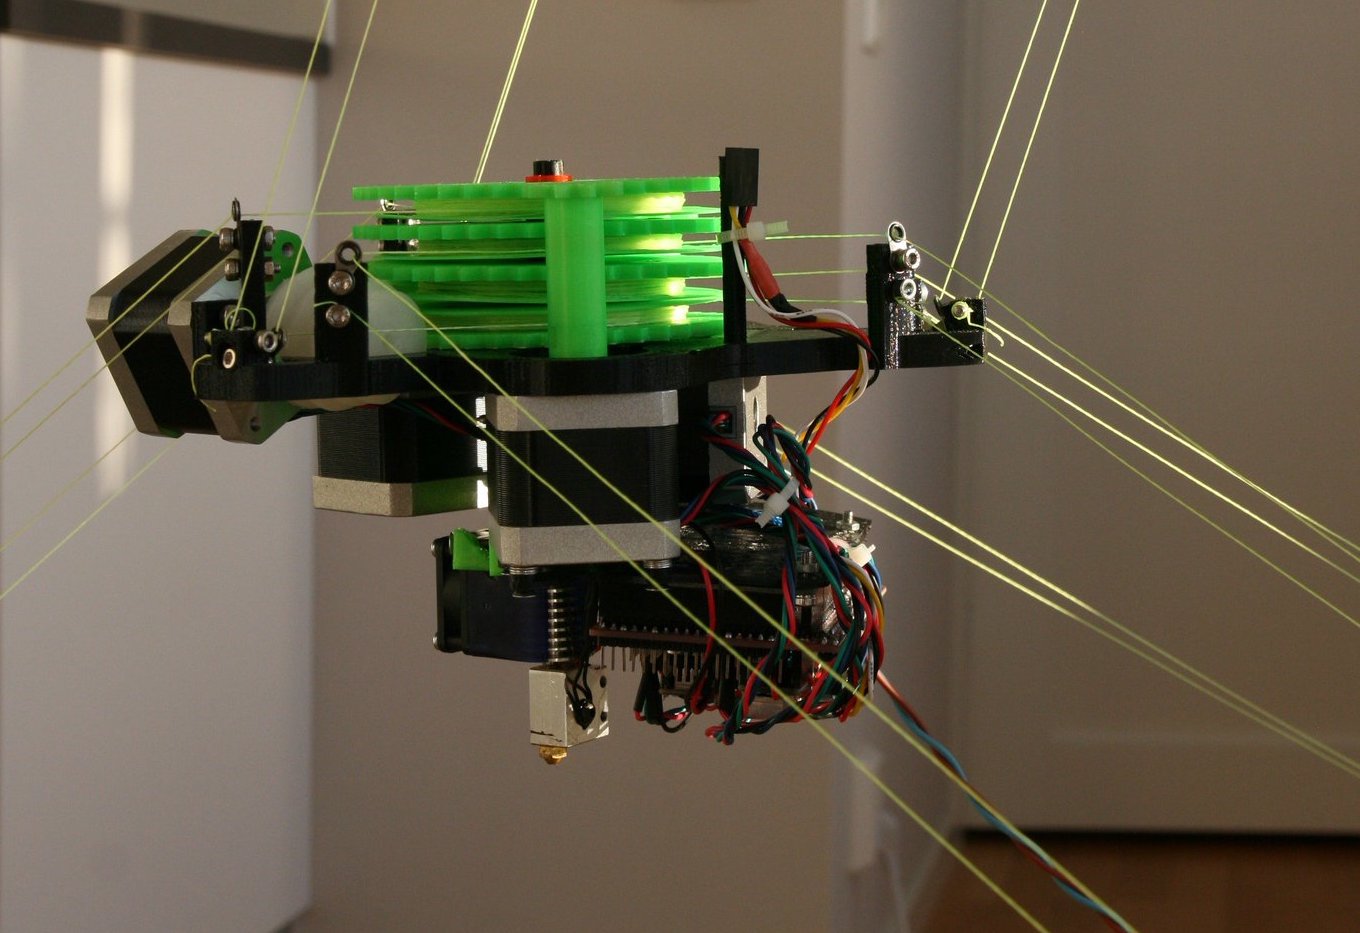 Open-source advocates: ORNL’s ‘SkyBAAM’ 3D printer “copying” earlier Hangprinter know-how